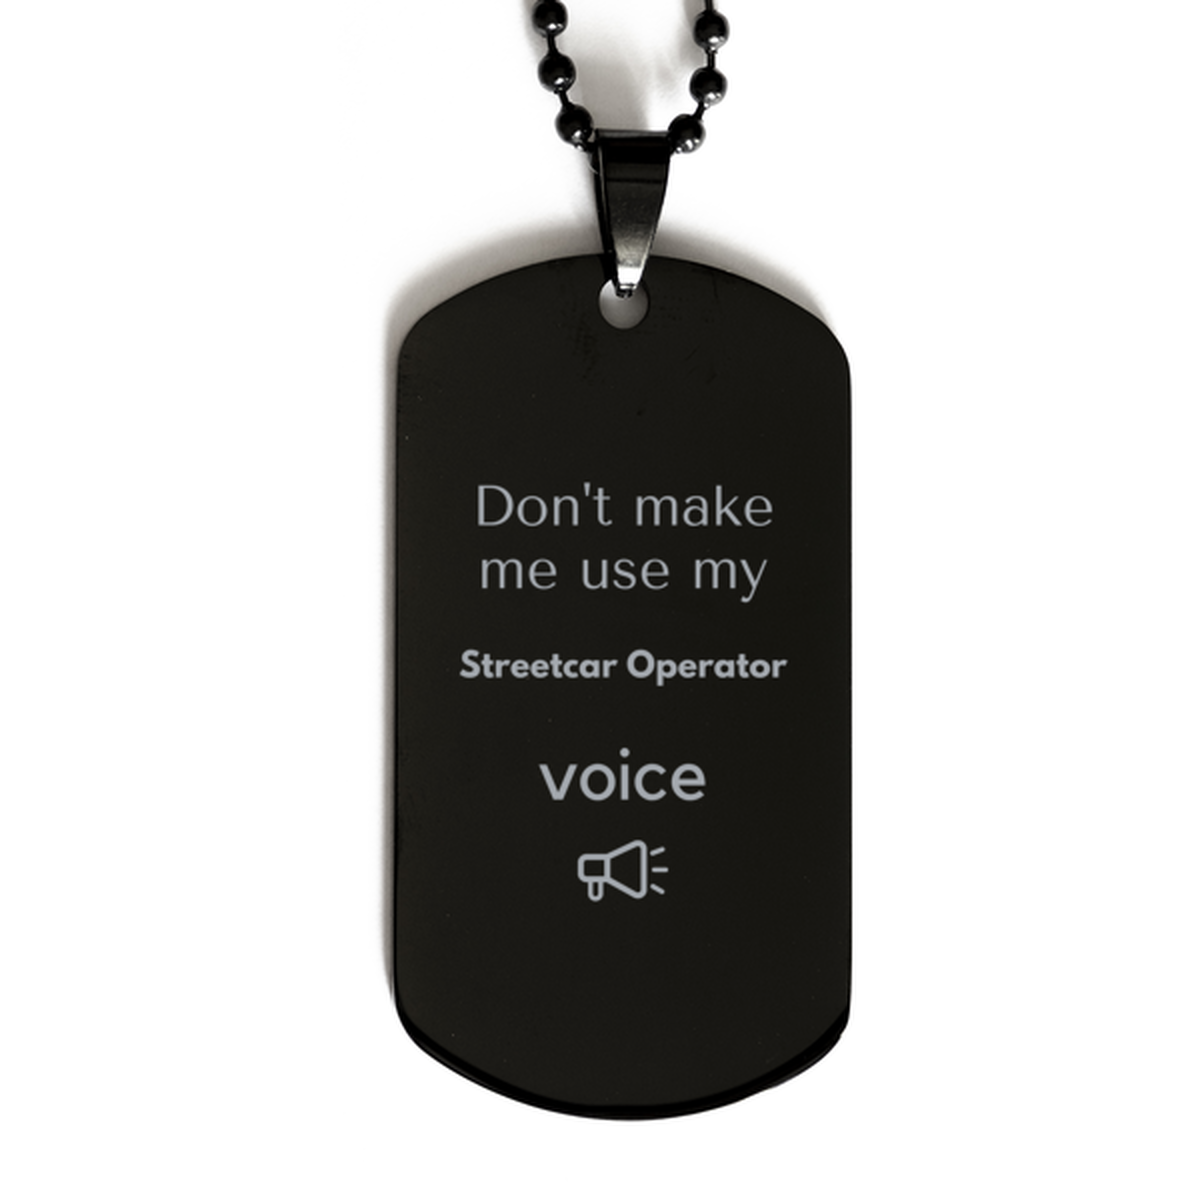 Don't make me use my Streetcar Operator voice, Sarcasm Streetcar Operator Gifts, Christmas Streetcar Operator Black Dog Tag Birthday Unique Gifts For Streetcar Operator Coworkers, Men, Women, Colleague, Friends